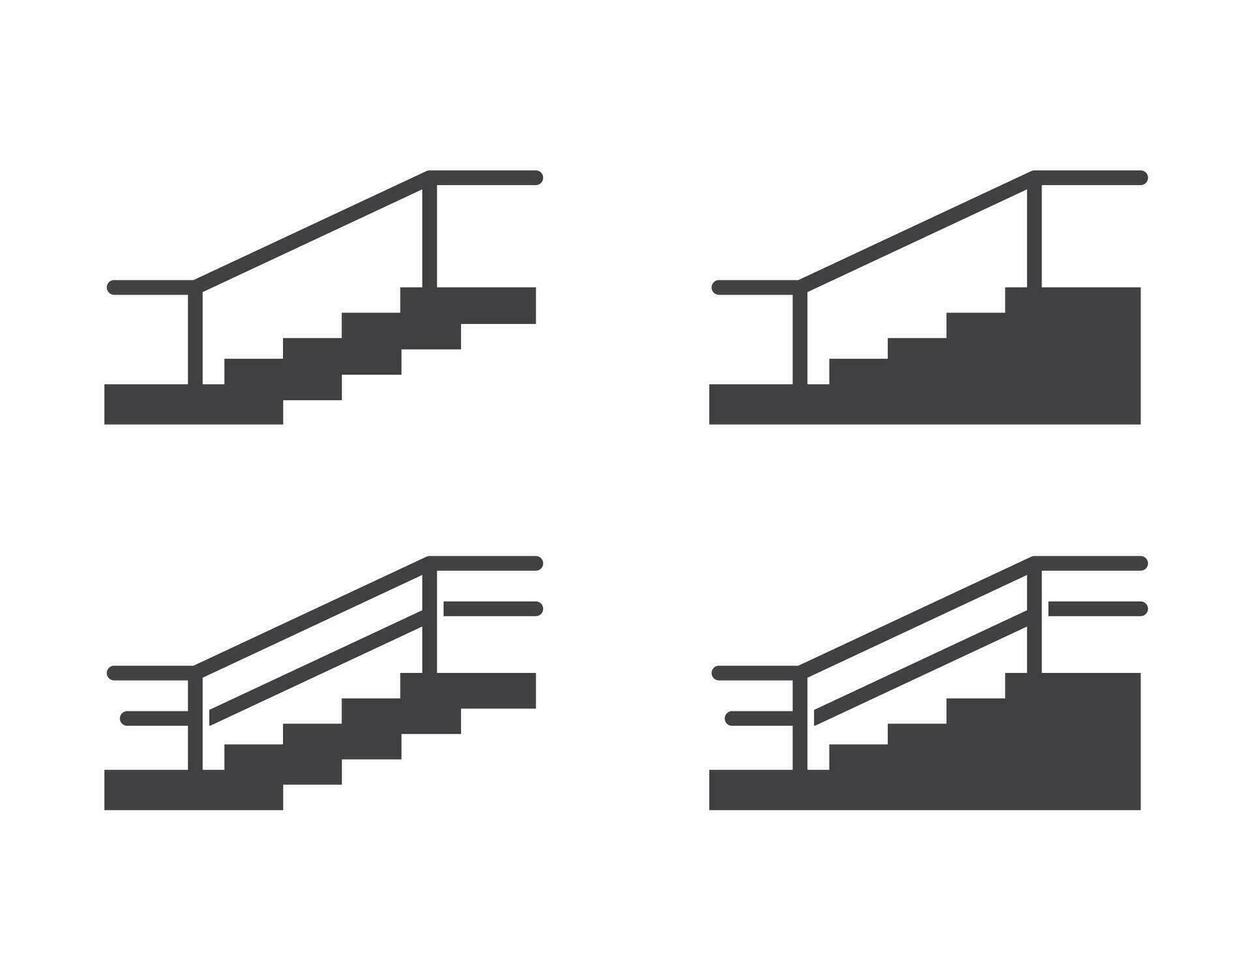 Stairs icon isolated simple silhouette flat style vector illustration.